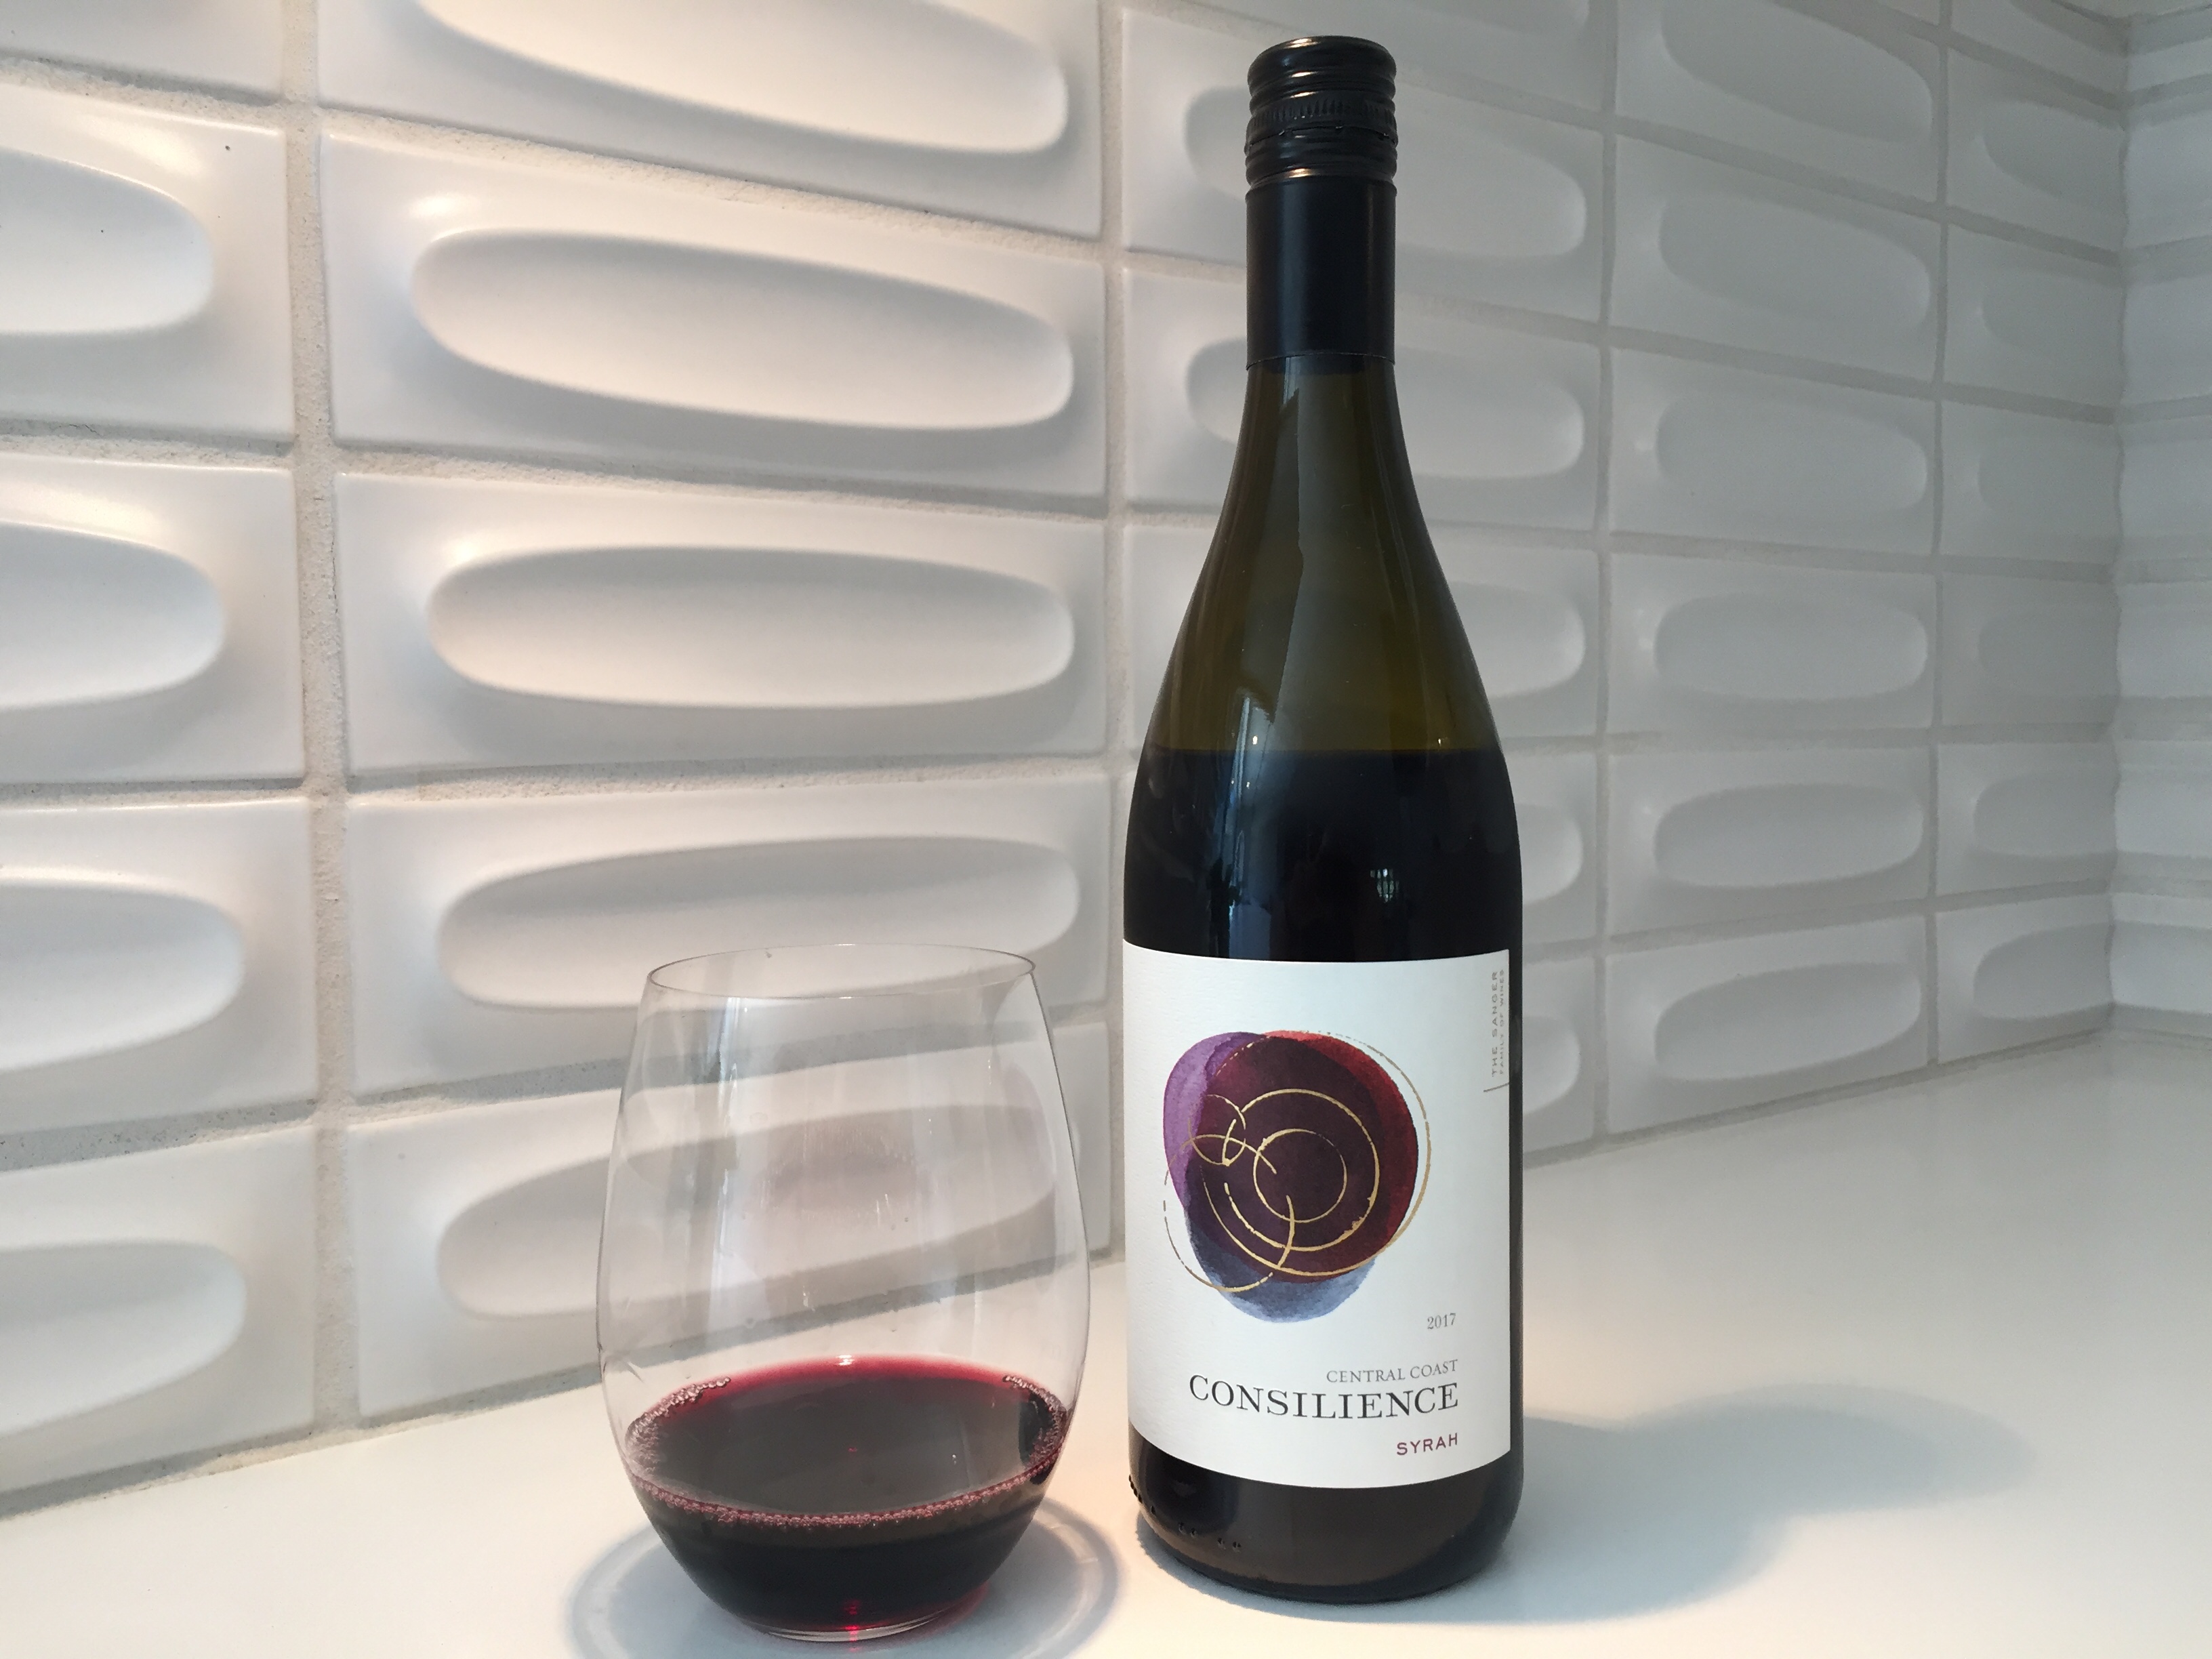 Bottle and glass of Consilience 2017 Syrah